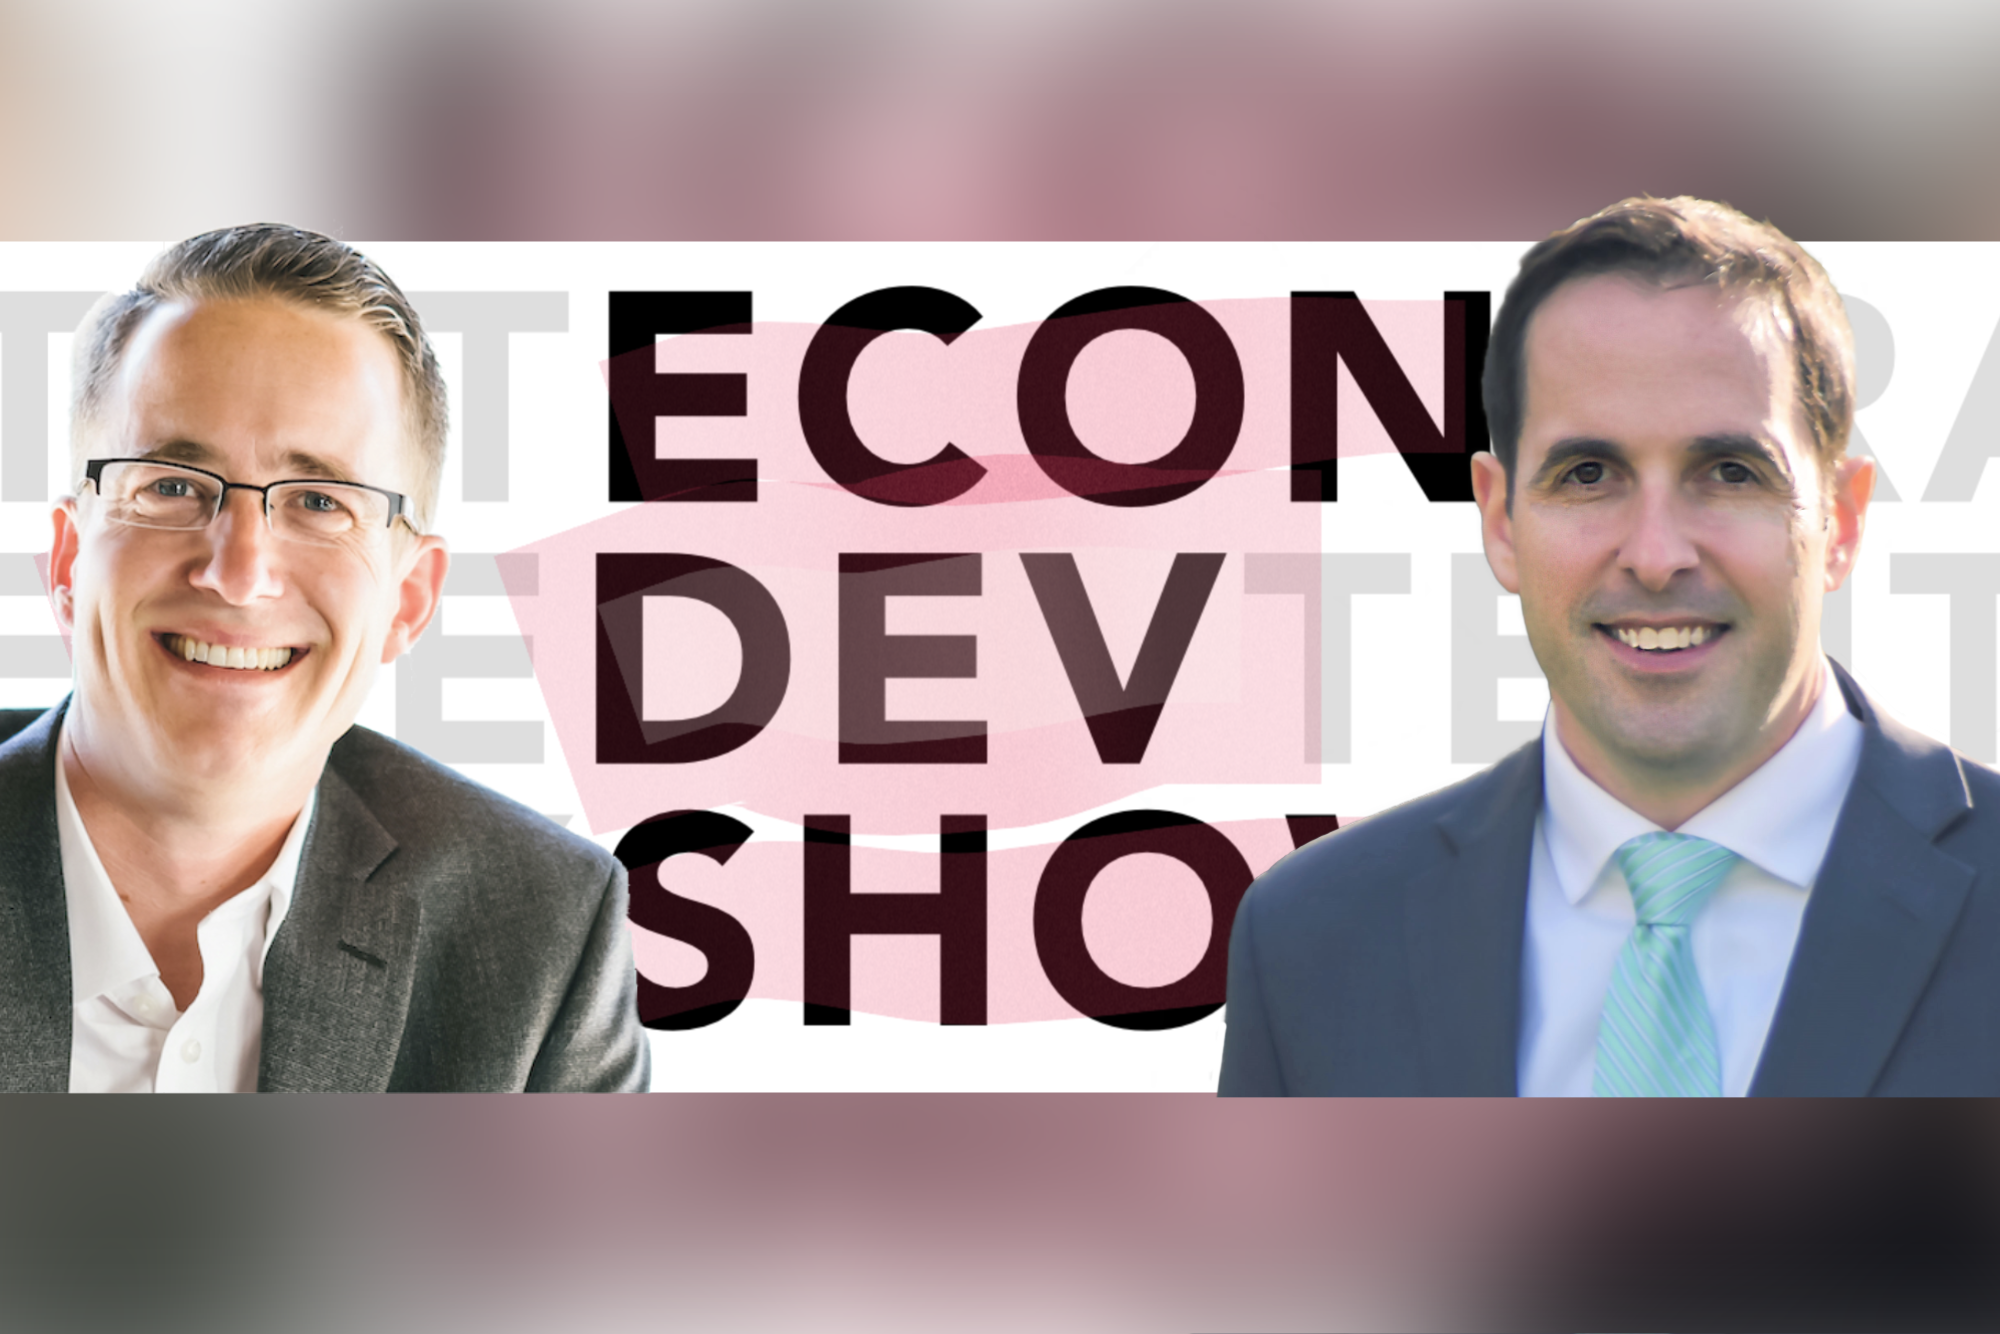 Podcast Episode 51 - Economic Development is Changing with Nathan Ohle, President & CEO of the IEDC